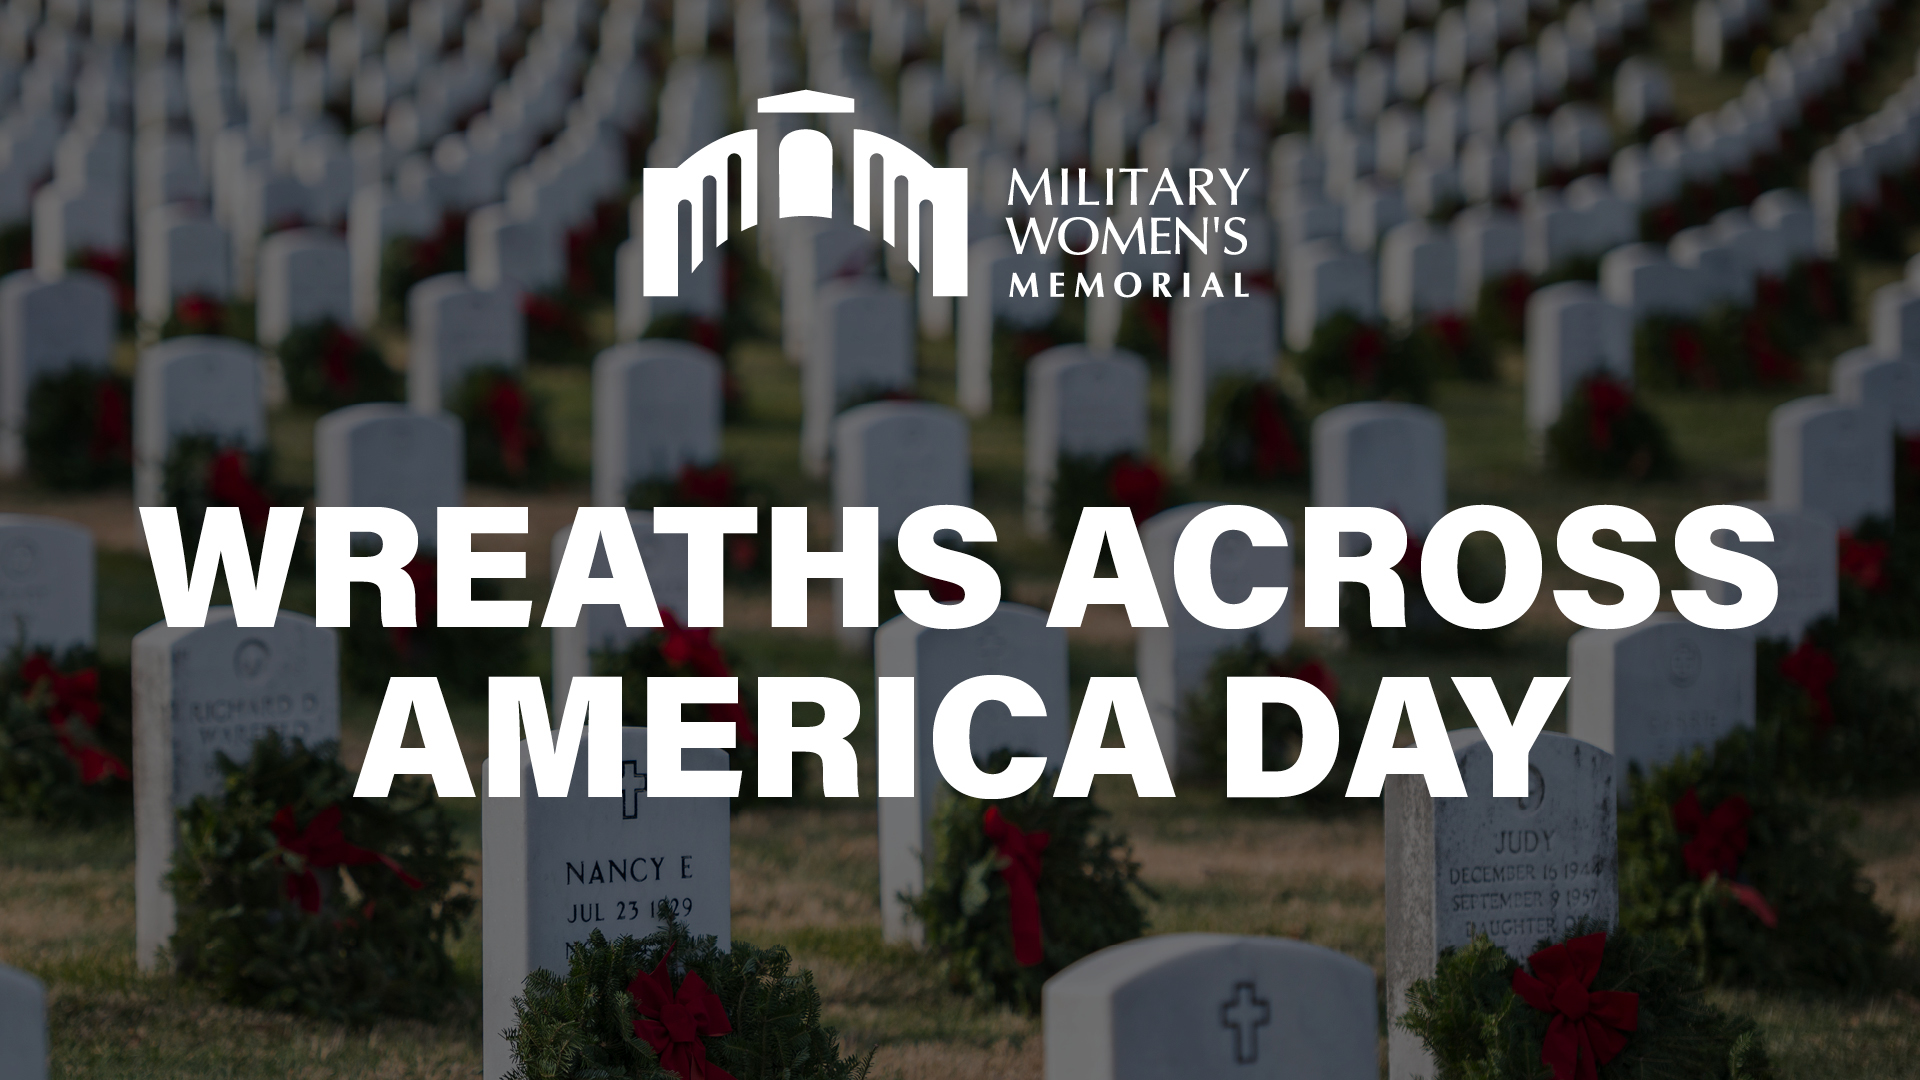 Wreaths Across America Day with a close up photograph of Arlington National Cemetery grave sites with wreaths laid on them.